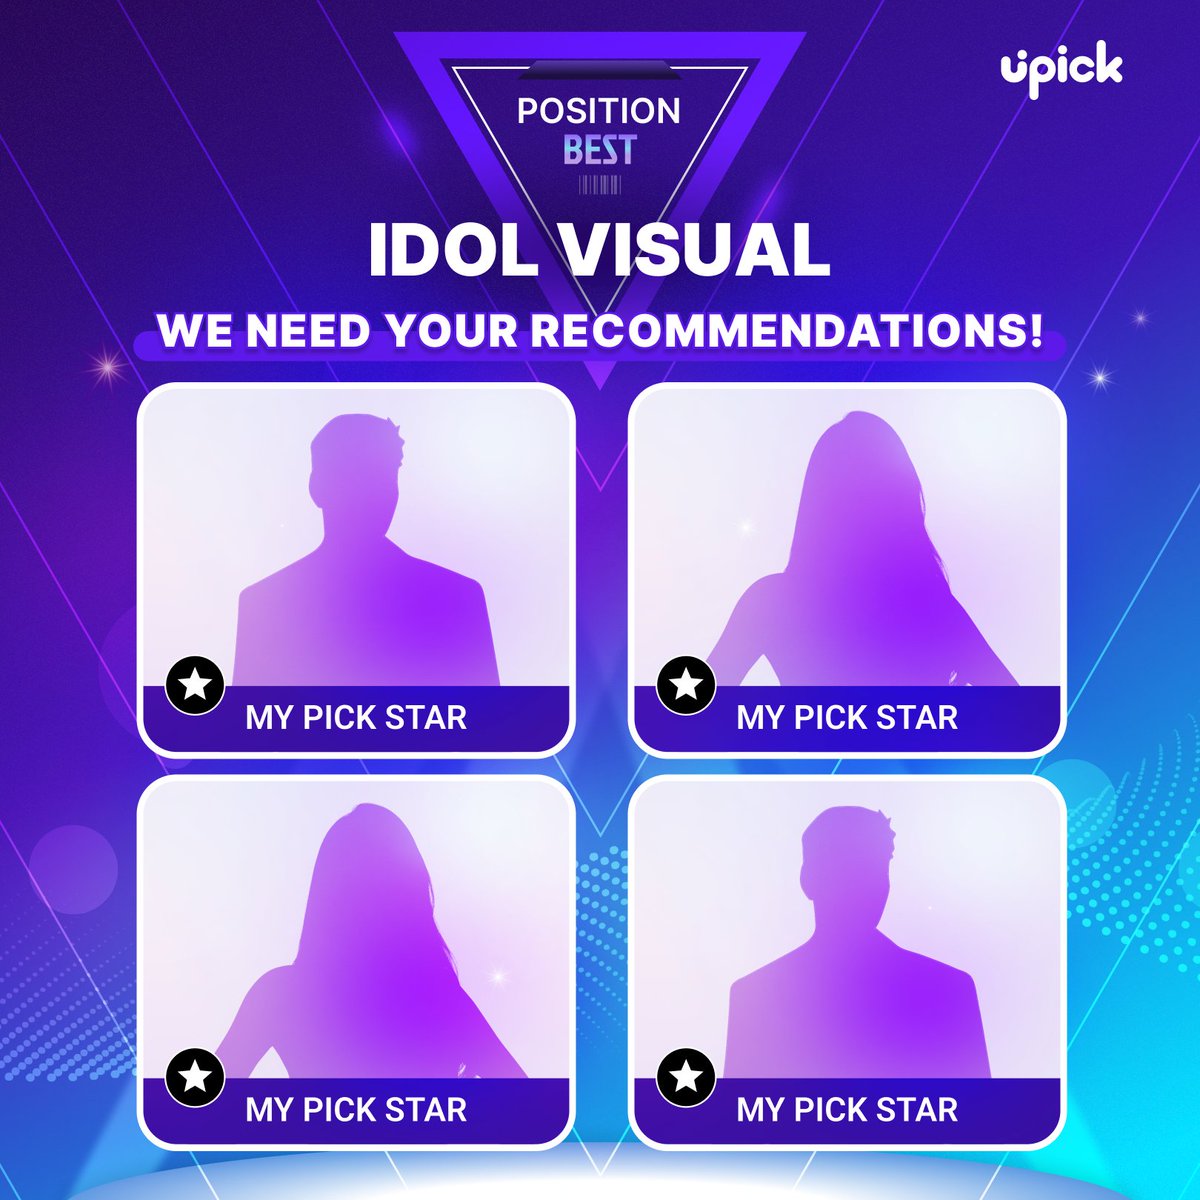 👑 The next UPICK Position vote is > #VISUAL < 🎙️

내 아이돌이 후보로 선정될 수 있는 기회 (✧◡✧๑)
A chance for my idol to be selected as a nominations❗️❕

단, 추천 받은 아이돌이 후보에 포함되지 않을 수 있습니다
The recommended idol may not be included in the nominations